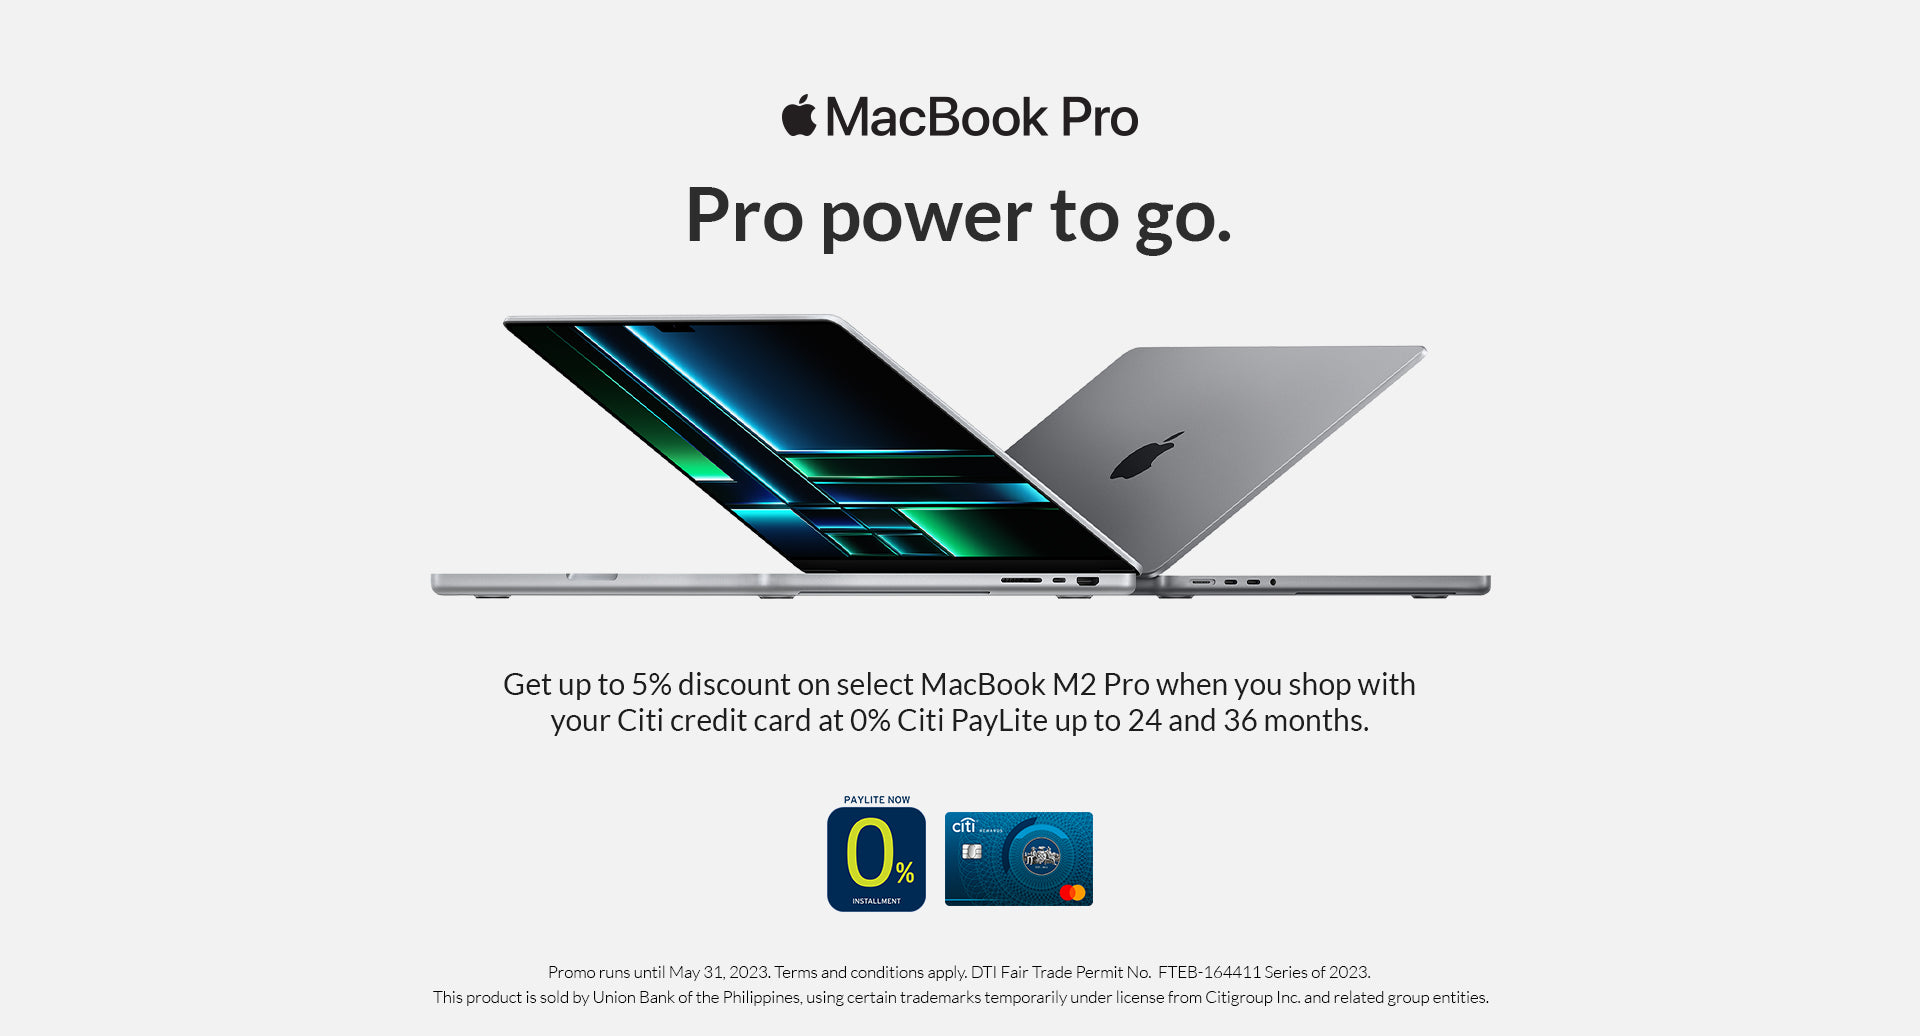 Enjoy up to 5% discount on select MacBook M2 Pro when you shop with yo